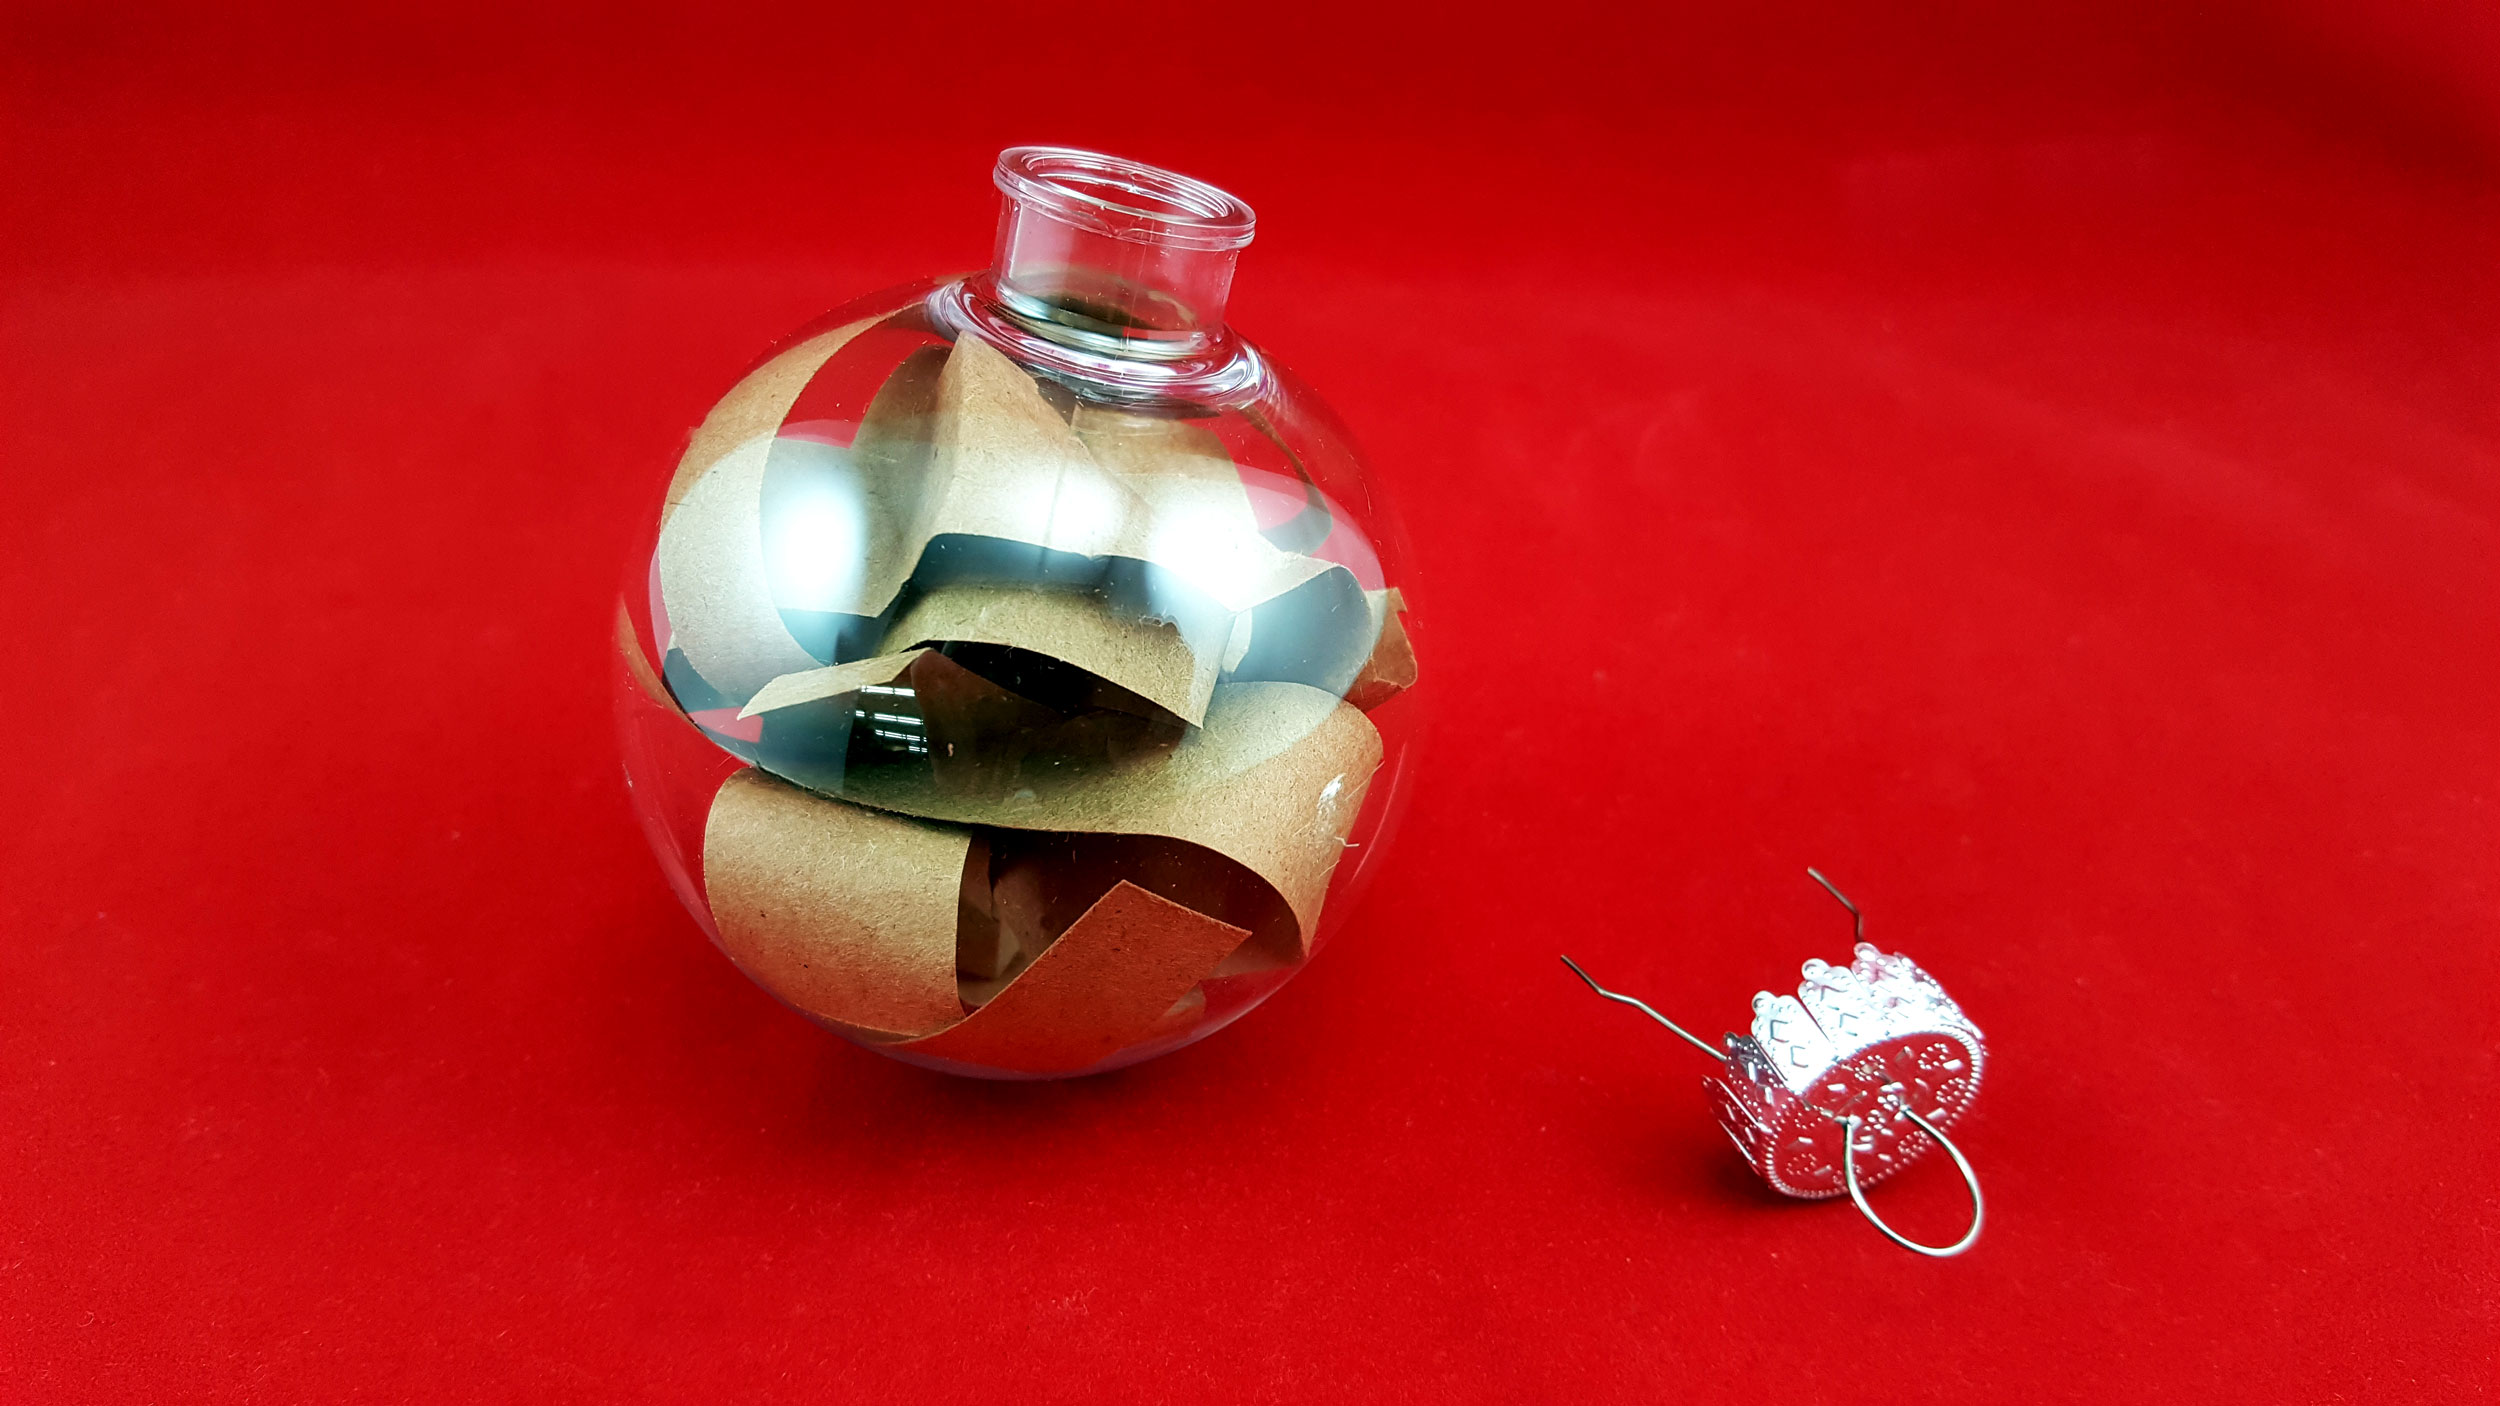 Reindeer ornament fill glass ball ornament with paper strips. | OrnamentShop.com